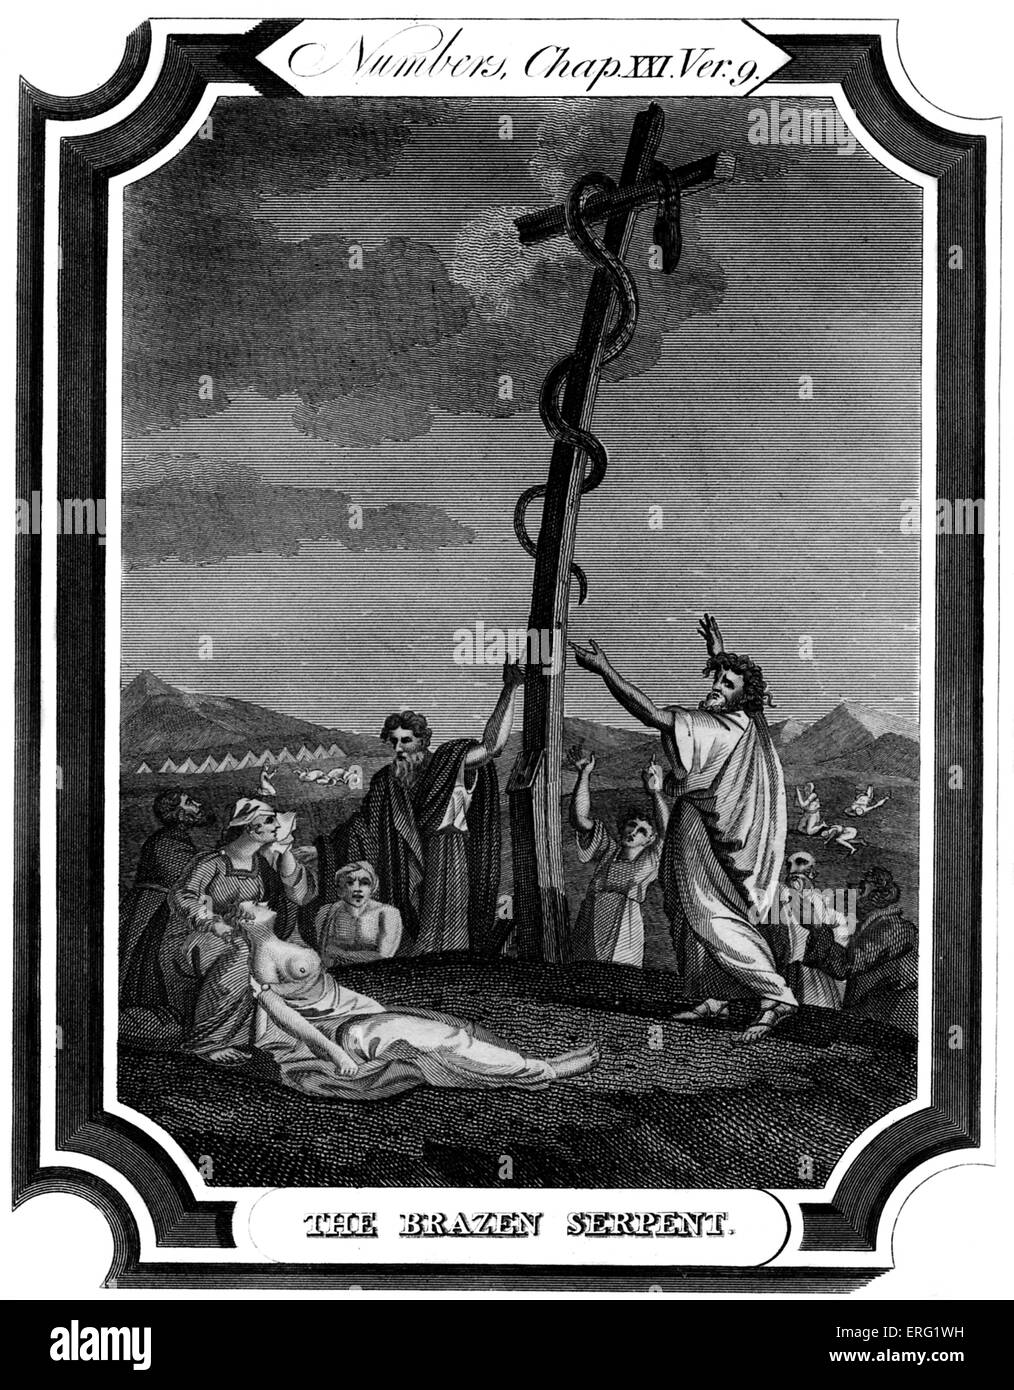 The Brazen Serpent. Moses erects a brass serpent, or Nehustan, to protect those bitten by a plague of snakes. Numbers, Chap XXI, verse 9 'And Moses made a serpent of brass, and put it upon a pole, and it came to pass, that if a serpent had bitten any man, when he beheld the serpent of brass, he lived.' Engraving by T O Barlow 1824 -1889. Stock Photo